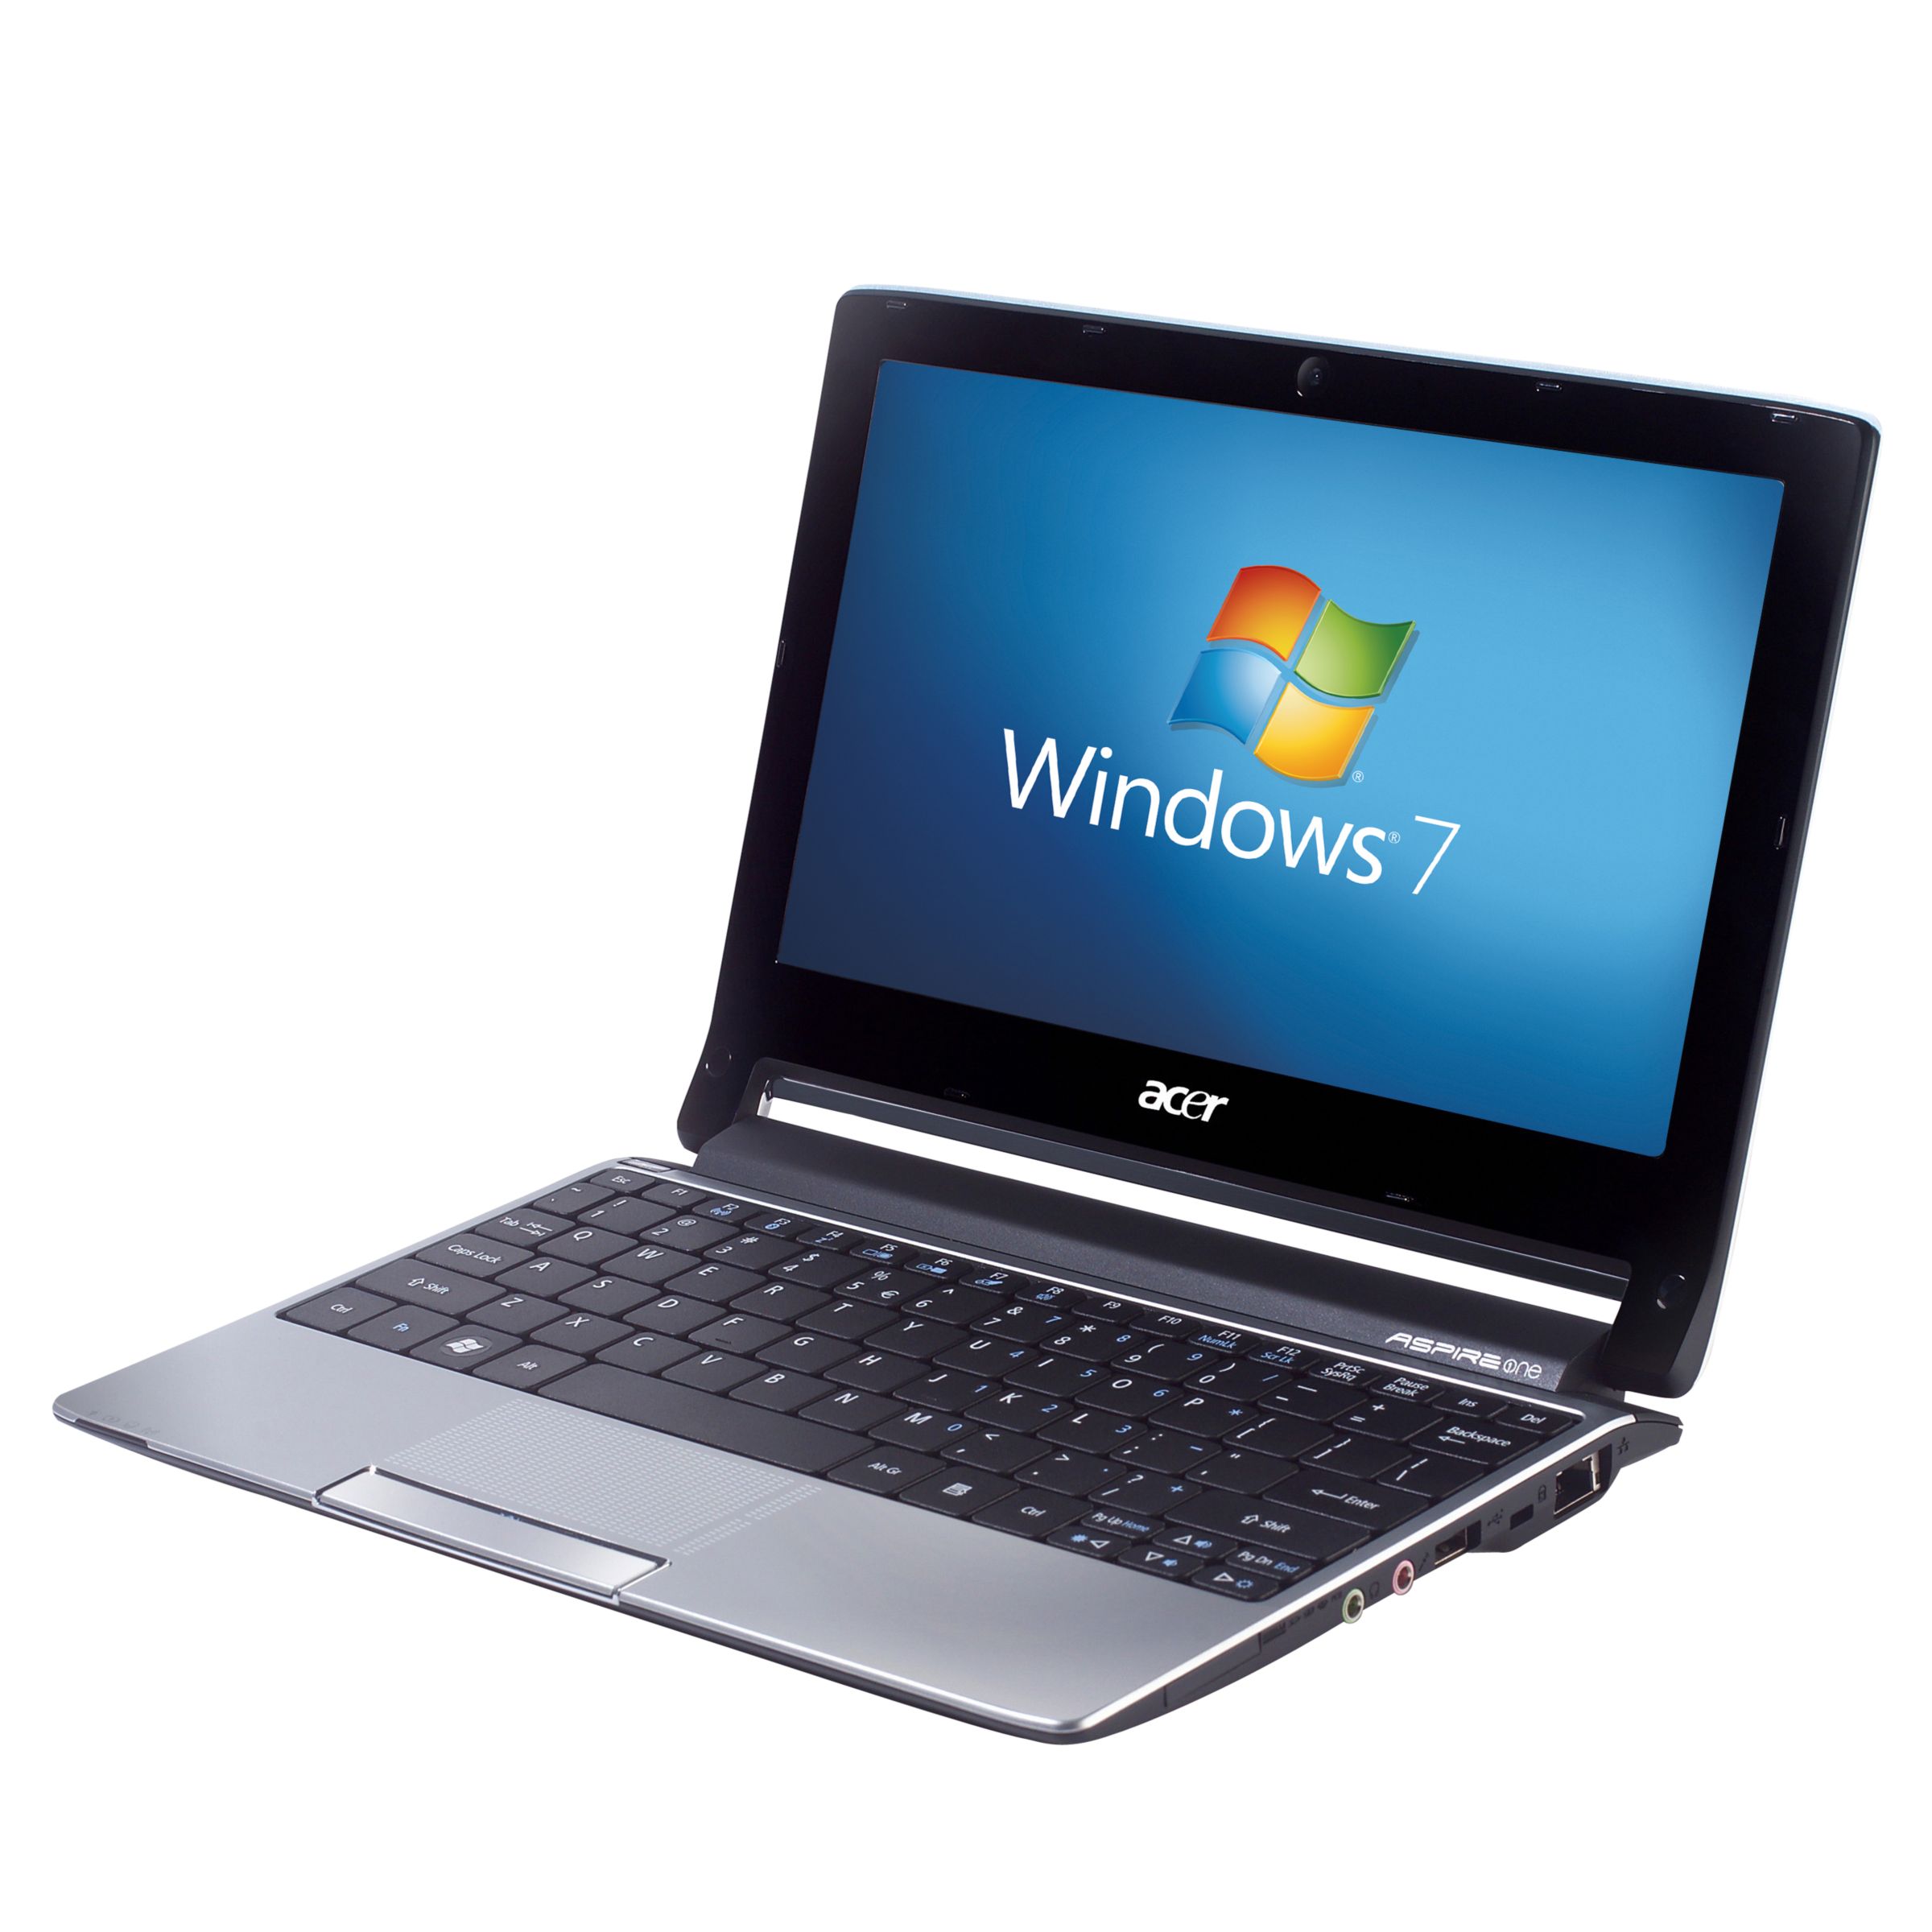 Acer Aspire One 533 Netbook, 1.5GHz with 10.1 Inch Display, White at John Lewis